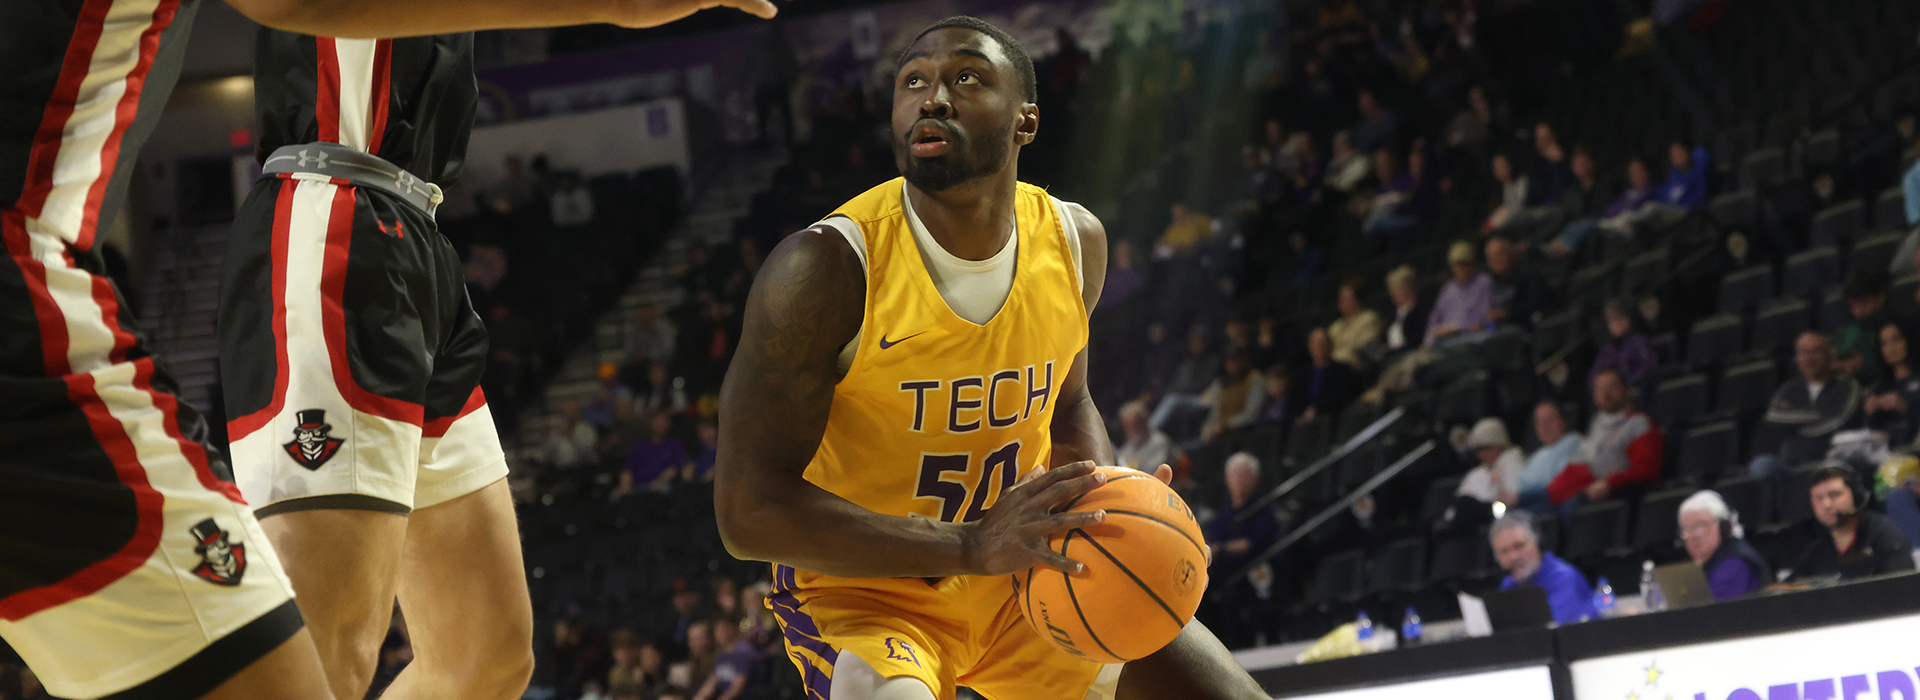 Last-second shot fall short as Golden Eagles drop rematch at SIUE